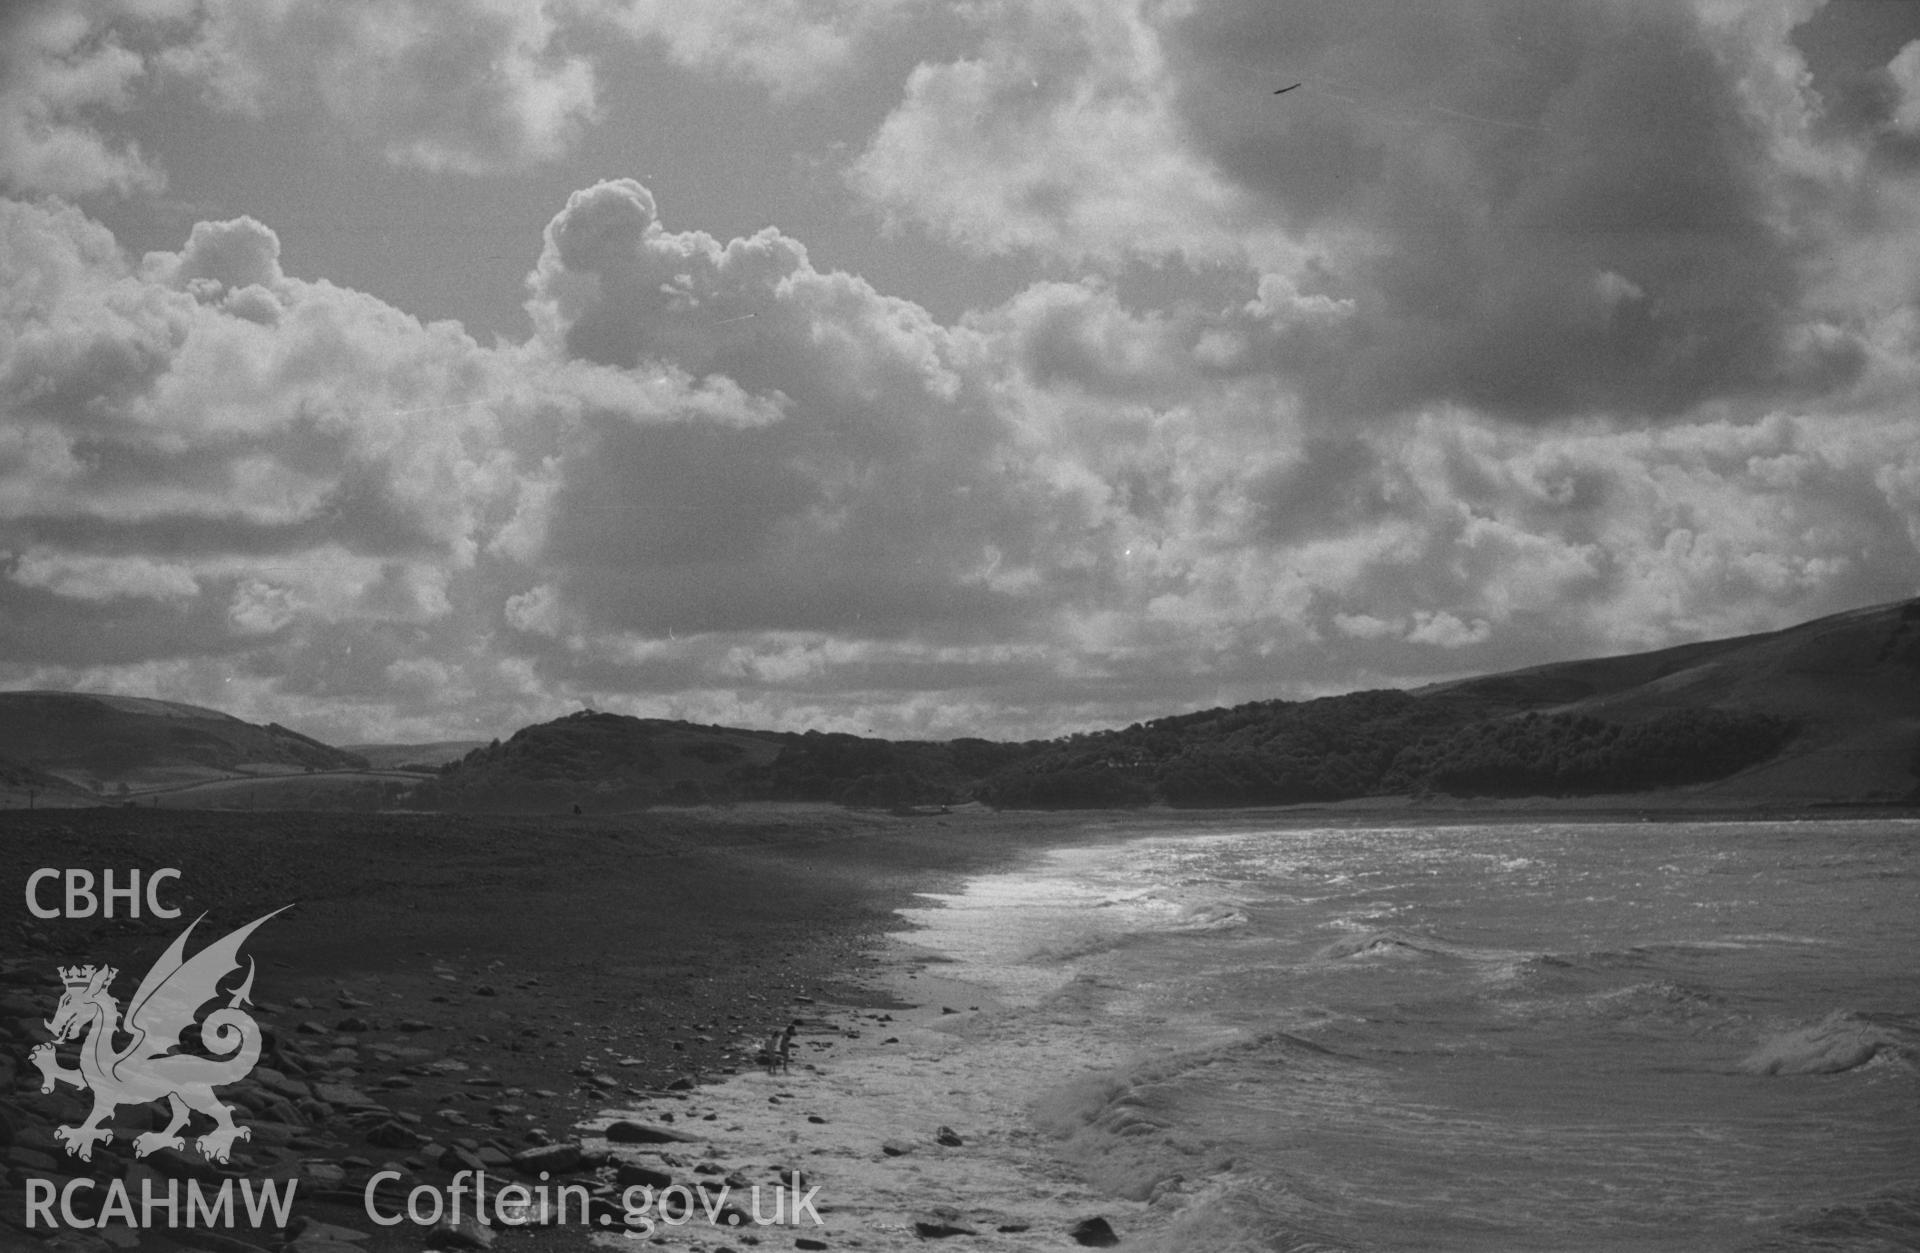 Digital copy of a black and white negative showing view of Tanybwlch beach, Aberystwyth. Photographed by Arthur O. Chater in September 1964 from Tanybwlch pier. Grid Reference SN 5785 8078. (Panorama. Photograph 8 of 10).